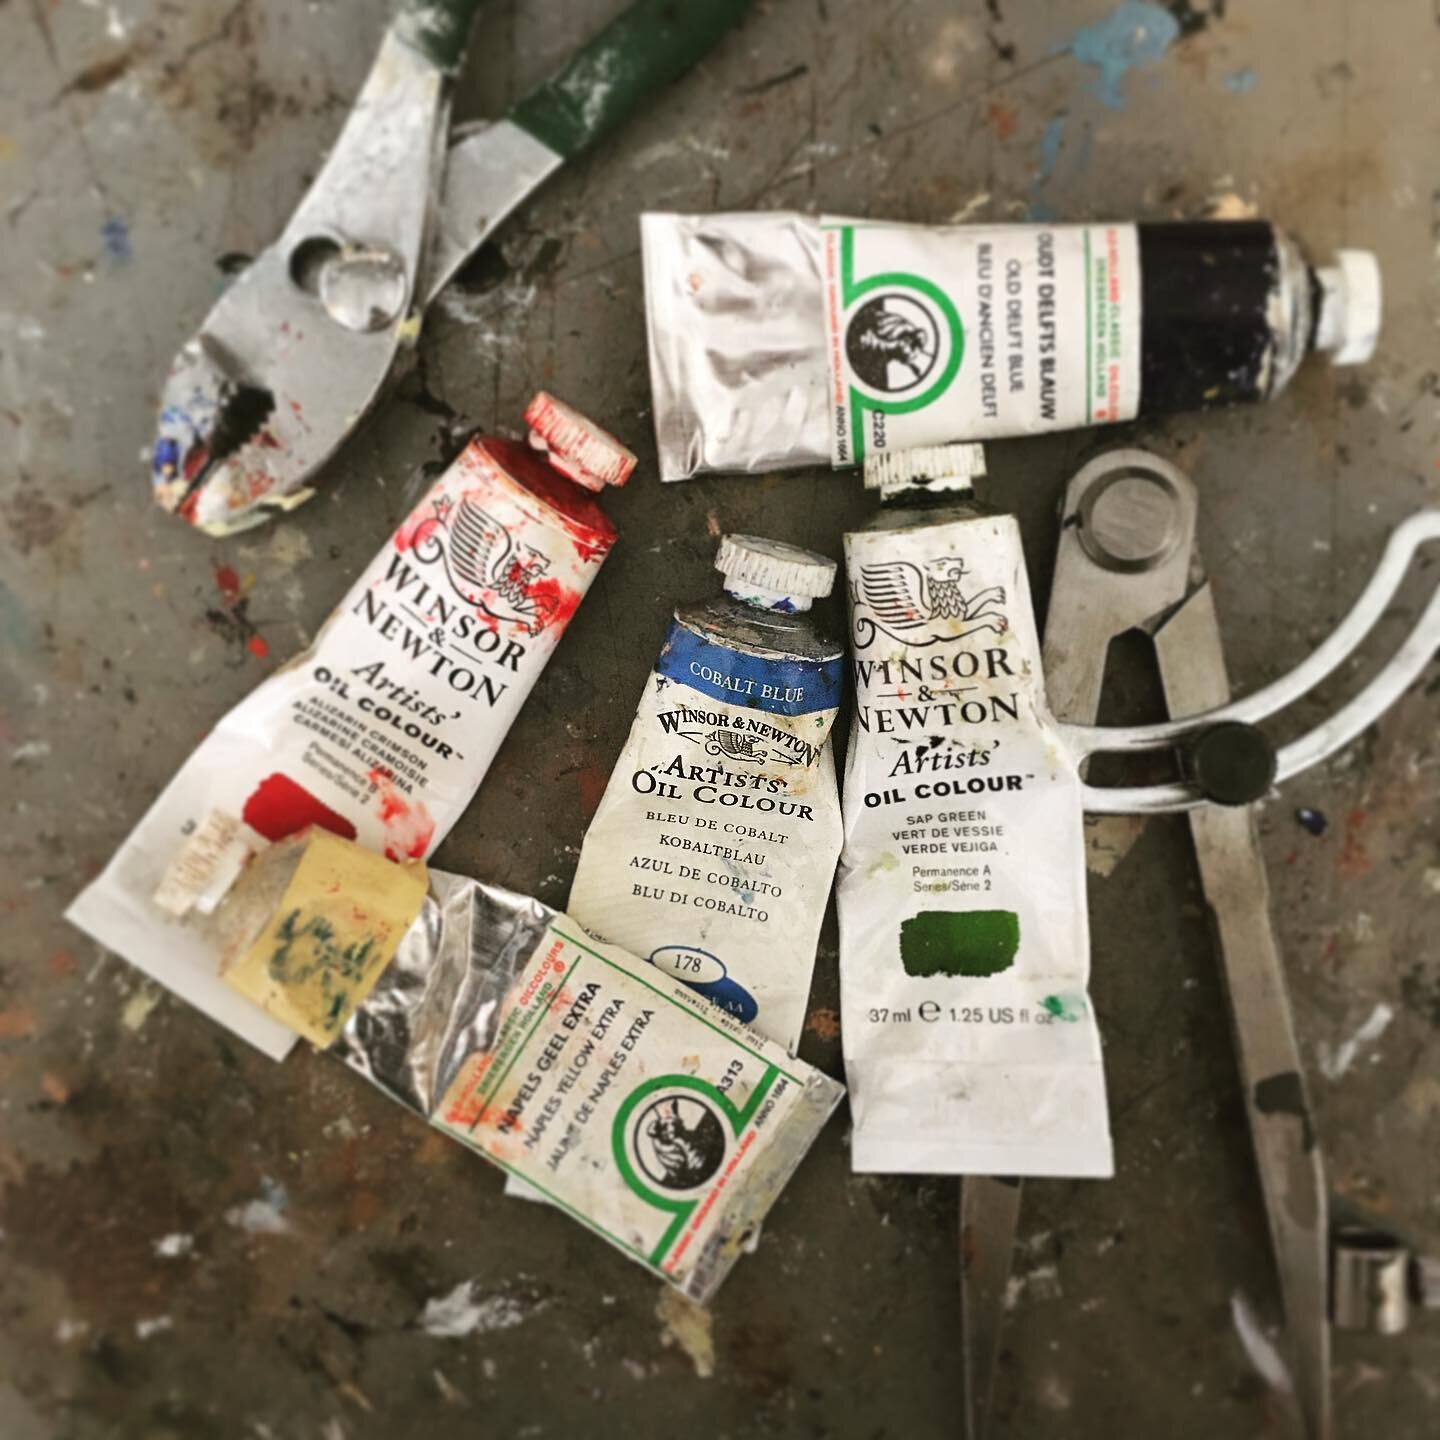 Help! Looking for advice from all the #paintermoms out there. I&rsquo;m primarily an oil painter but I&rsquo;m not sure if I should stay with this medium through my pregnancy (snag: I may have a solo show this year 😳). I wear gloves, use non-toxic m